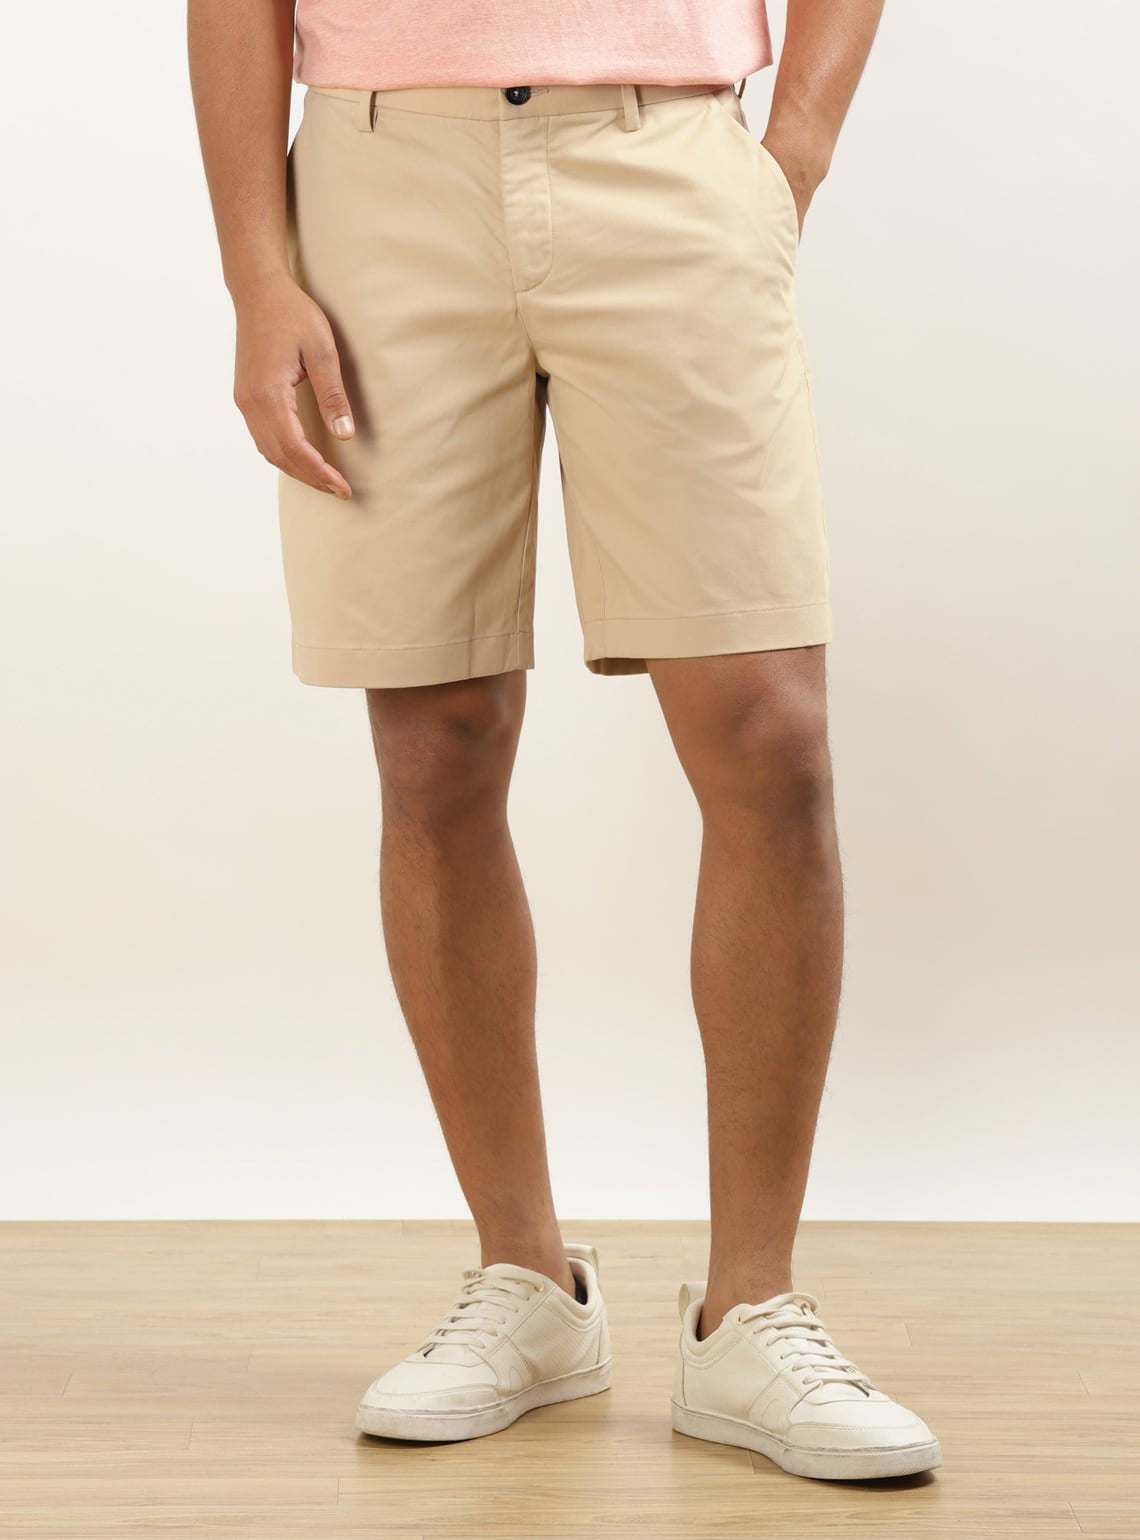 Toasted Almond Shorts